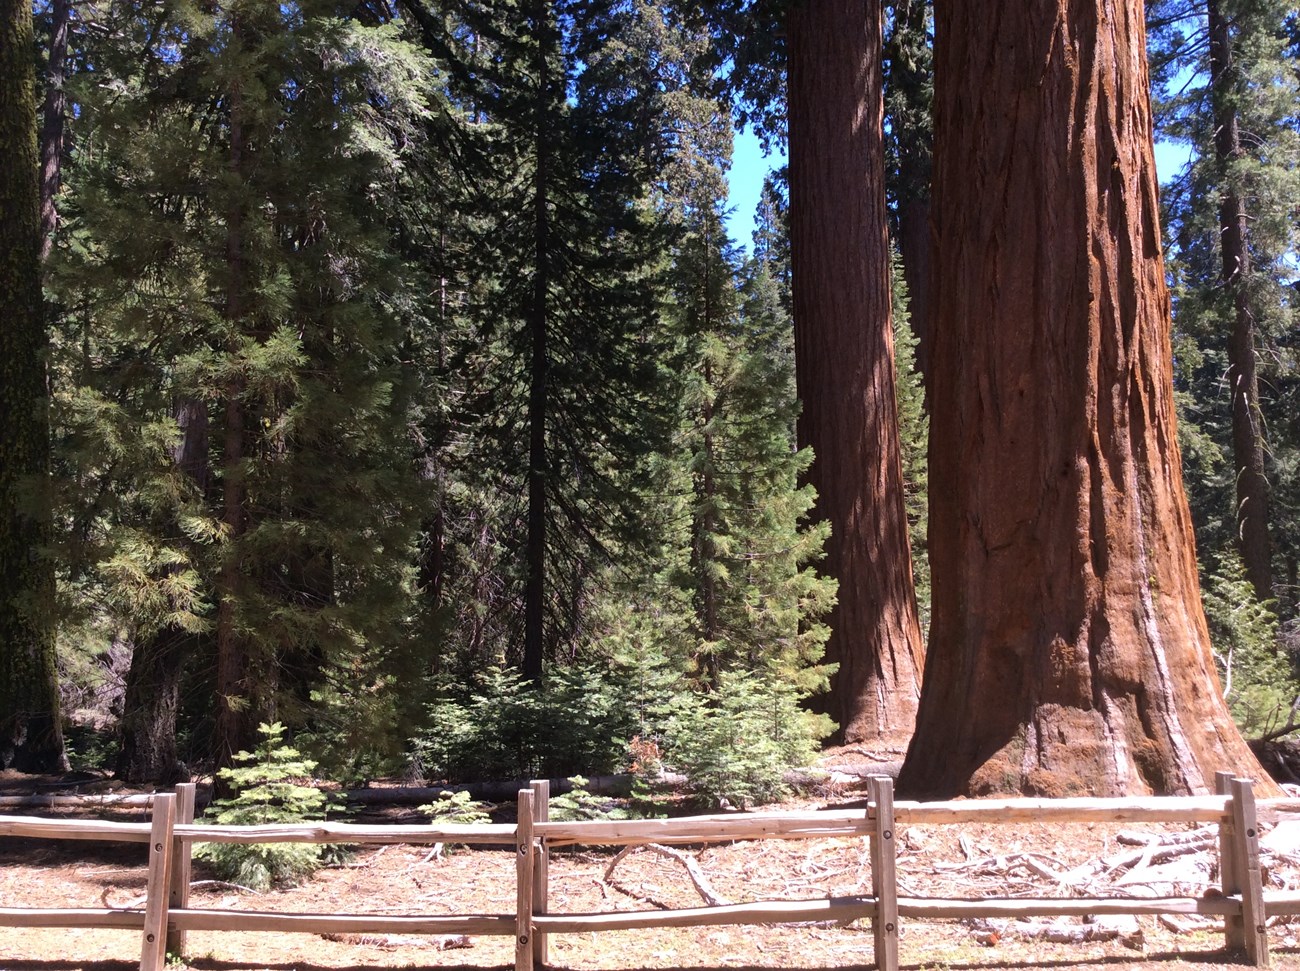 Two giant sequoia trees and pine trees along a fenced trail.